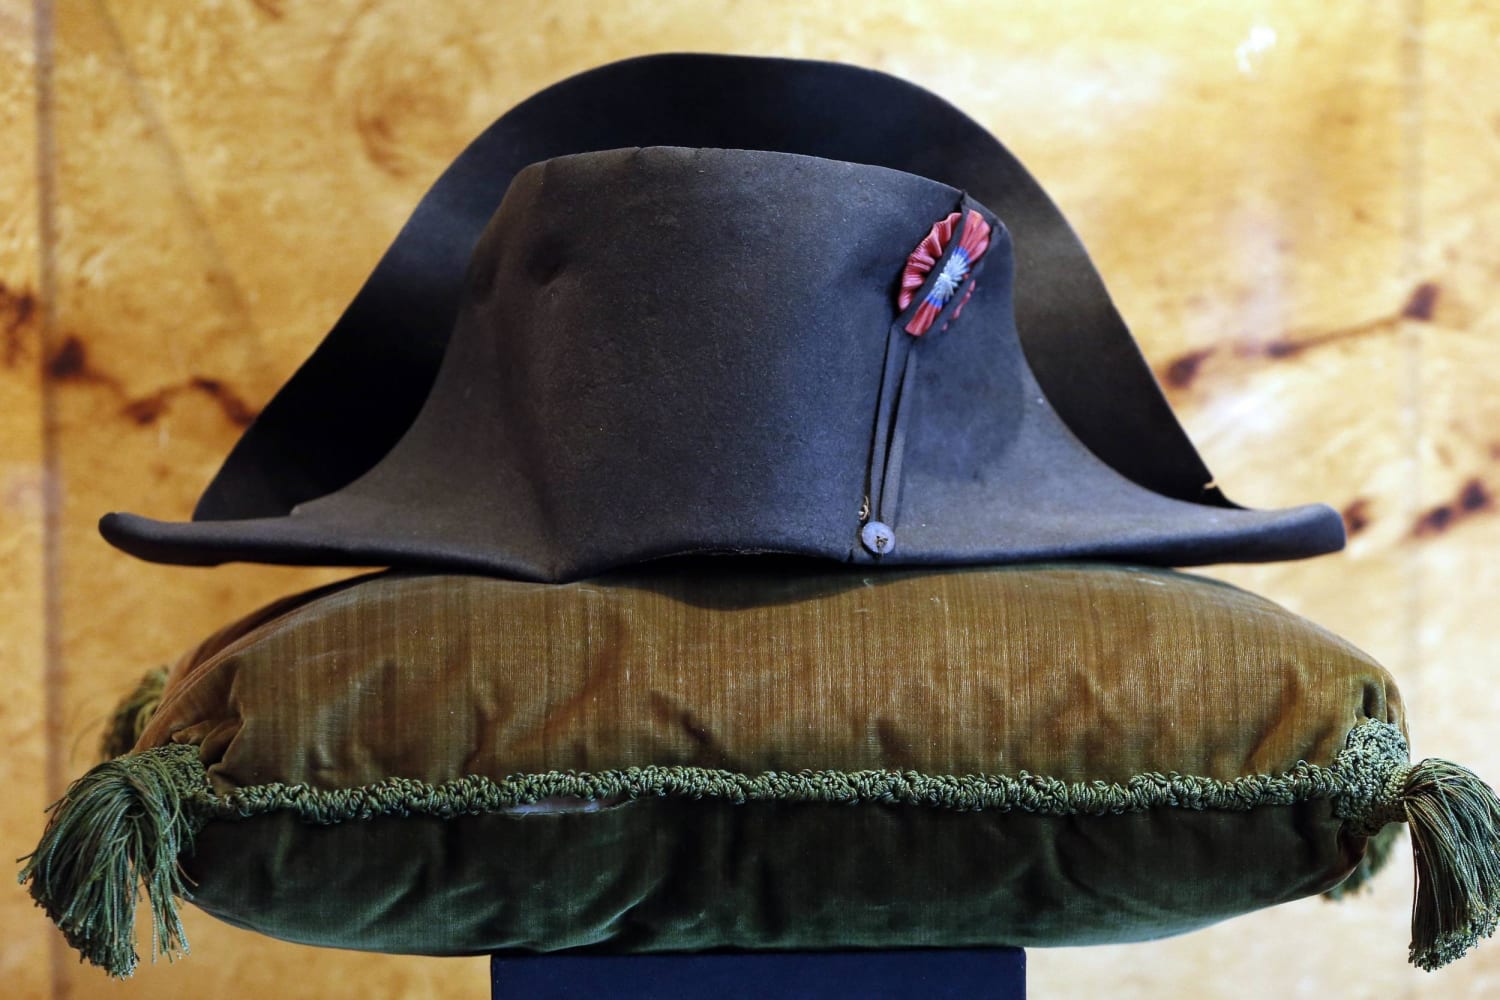 Napoleon's Hat Auctioned to South Korean for $2.4 Million - NBC News